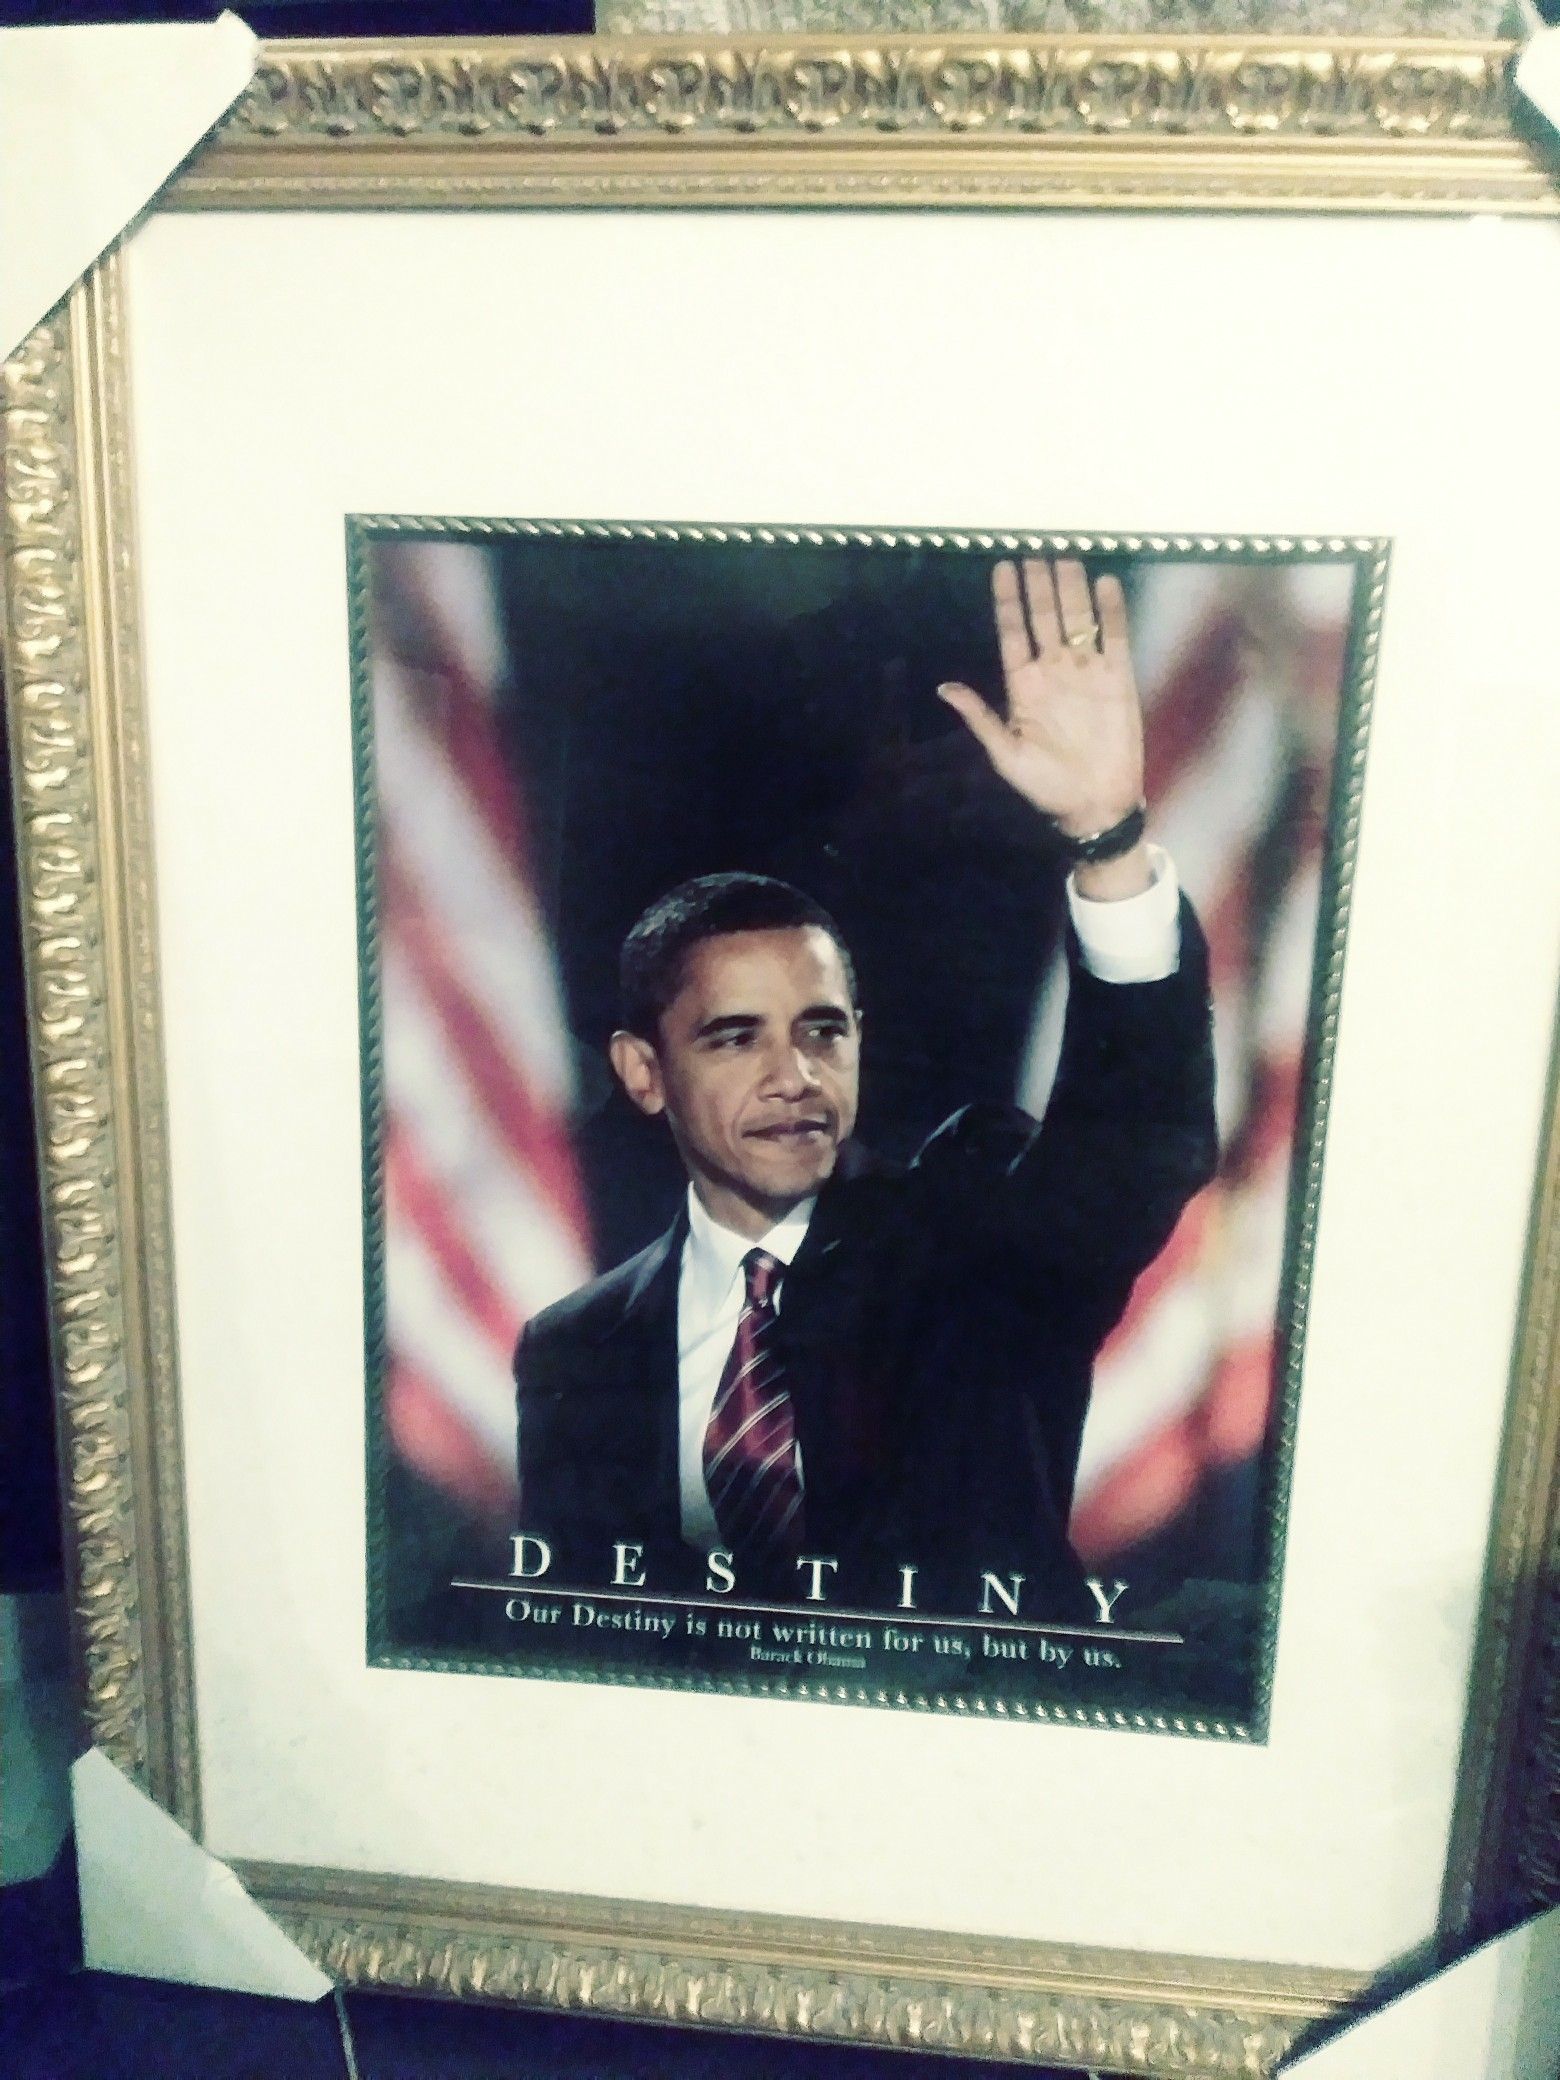 CLEARANCE - Memorable portrait of the first and only black President , Barack Obama